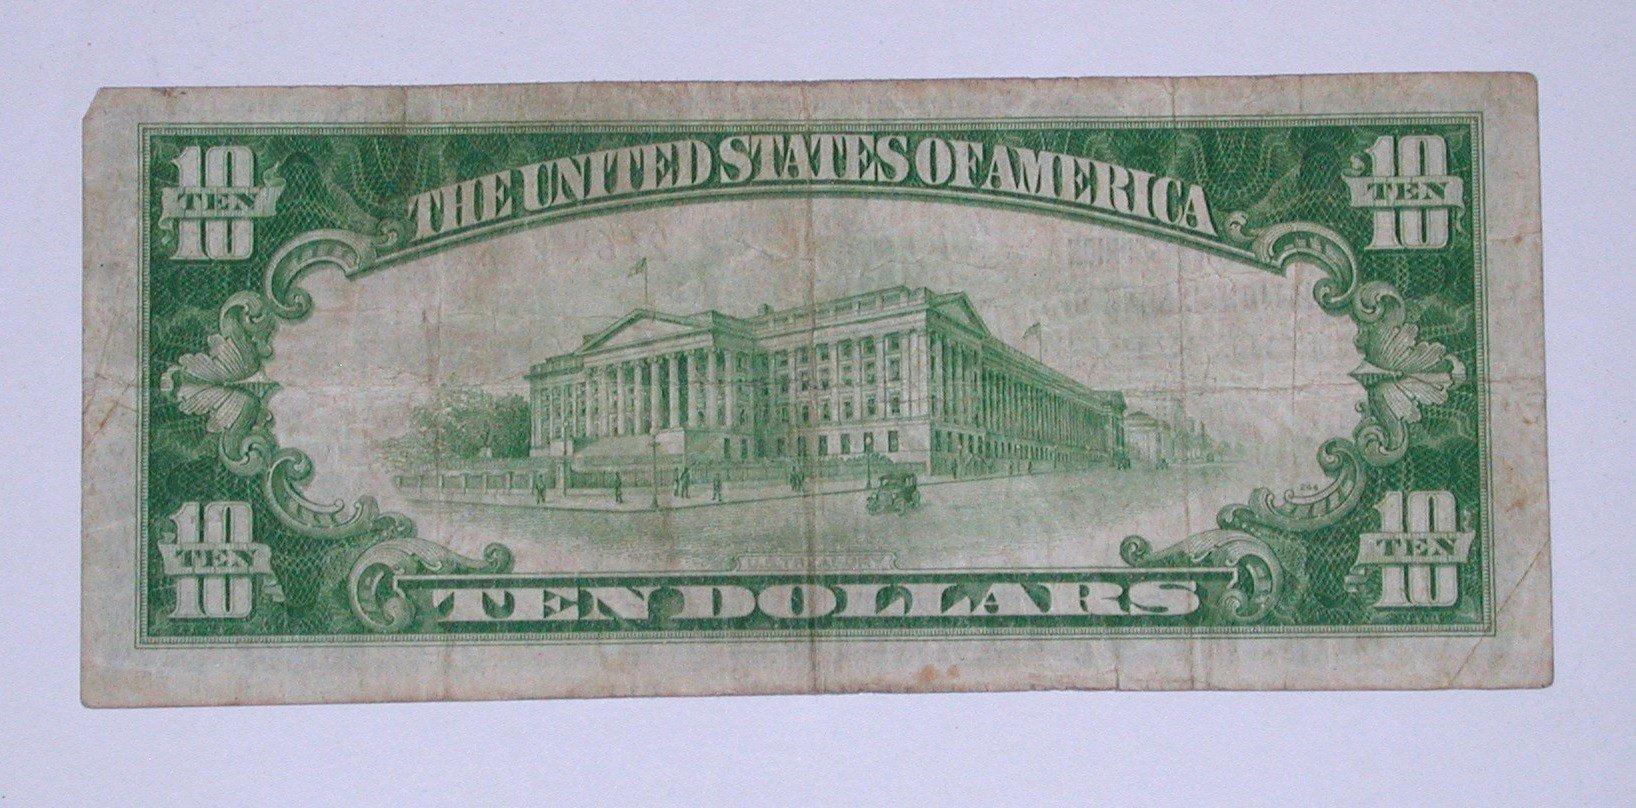 SERIES 1929 $10 NATIONAL CURRENCY - LOUISVILLE, KY